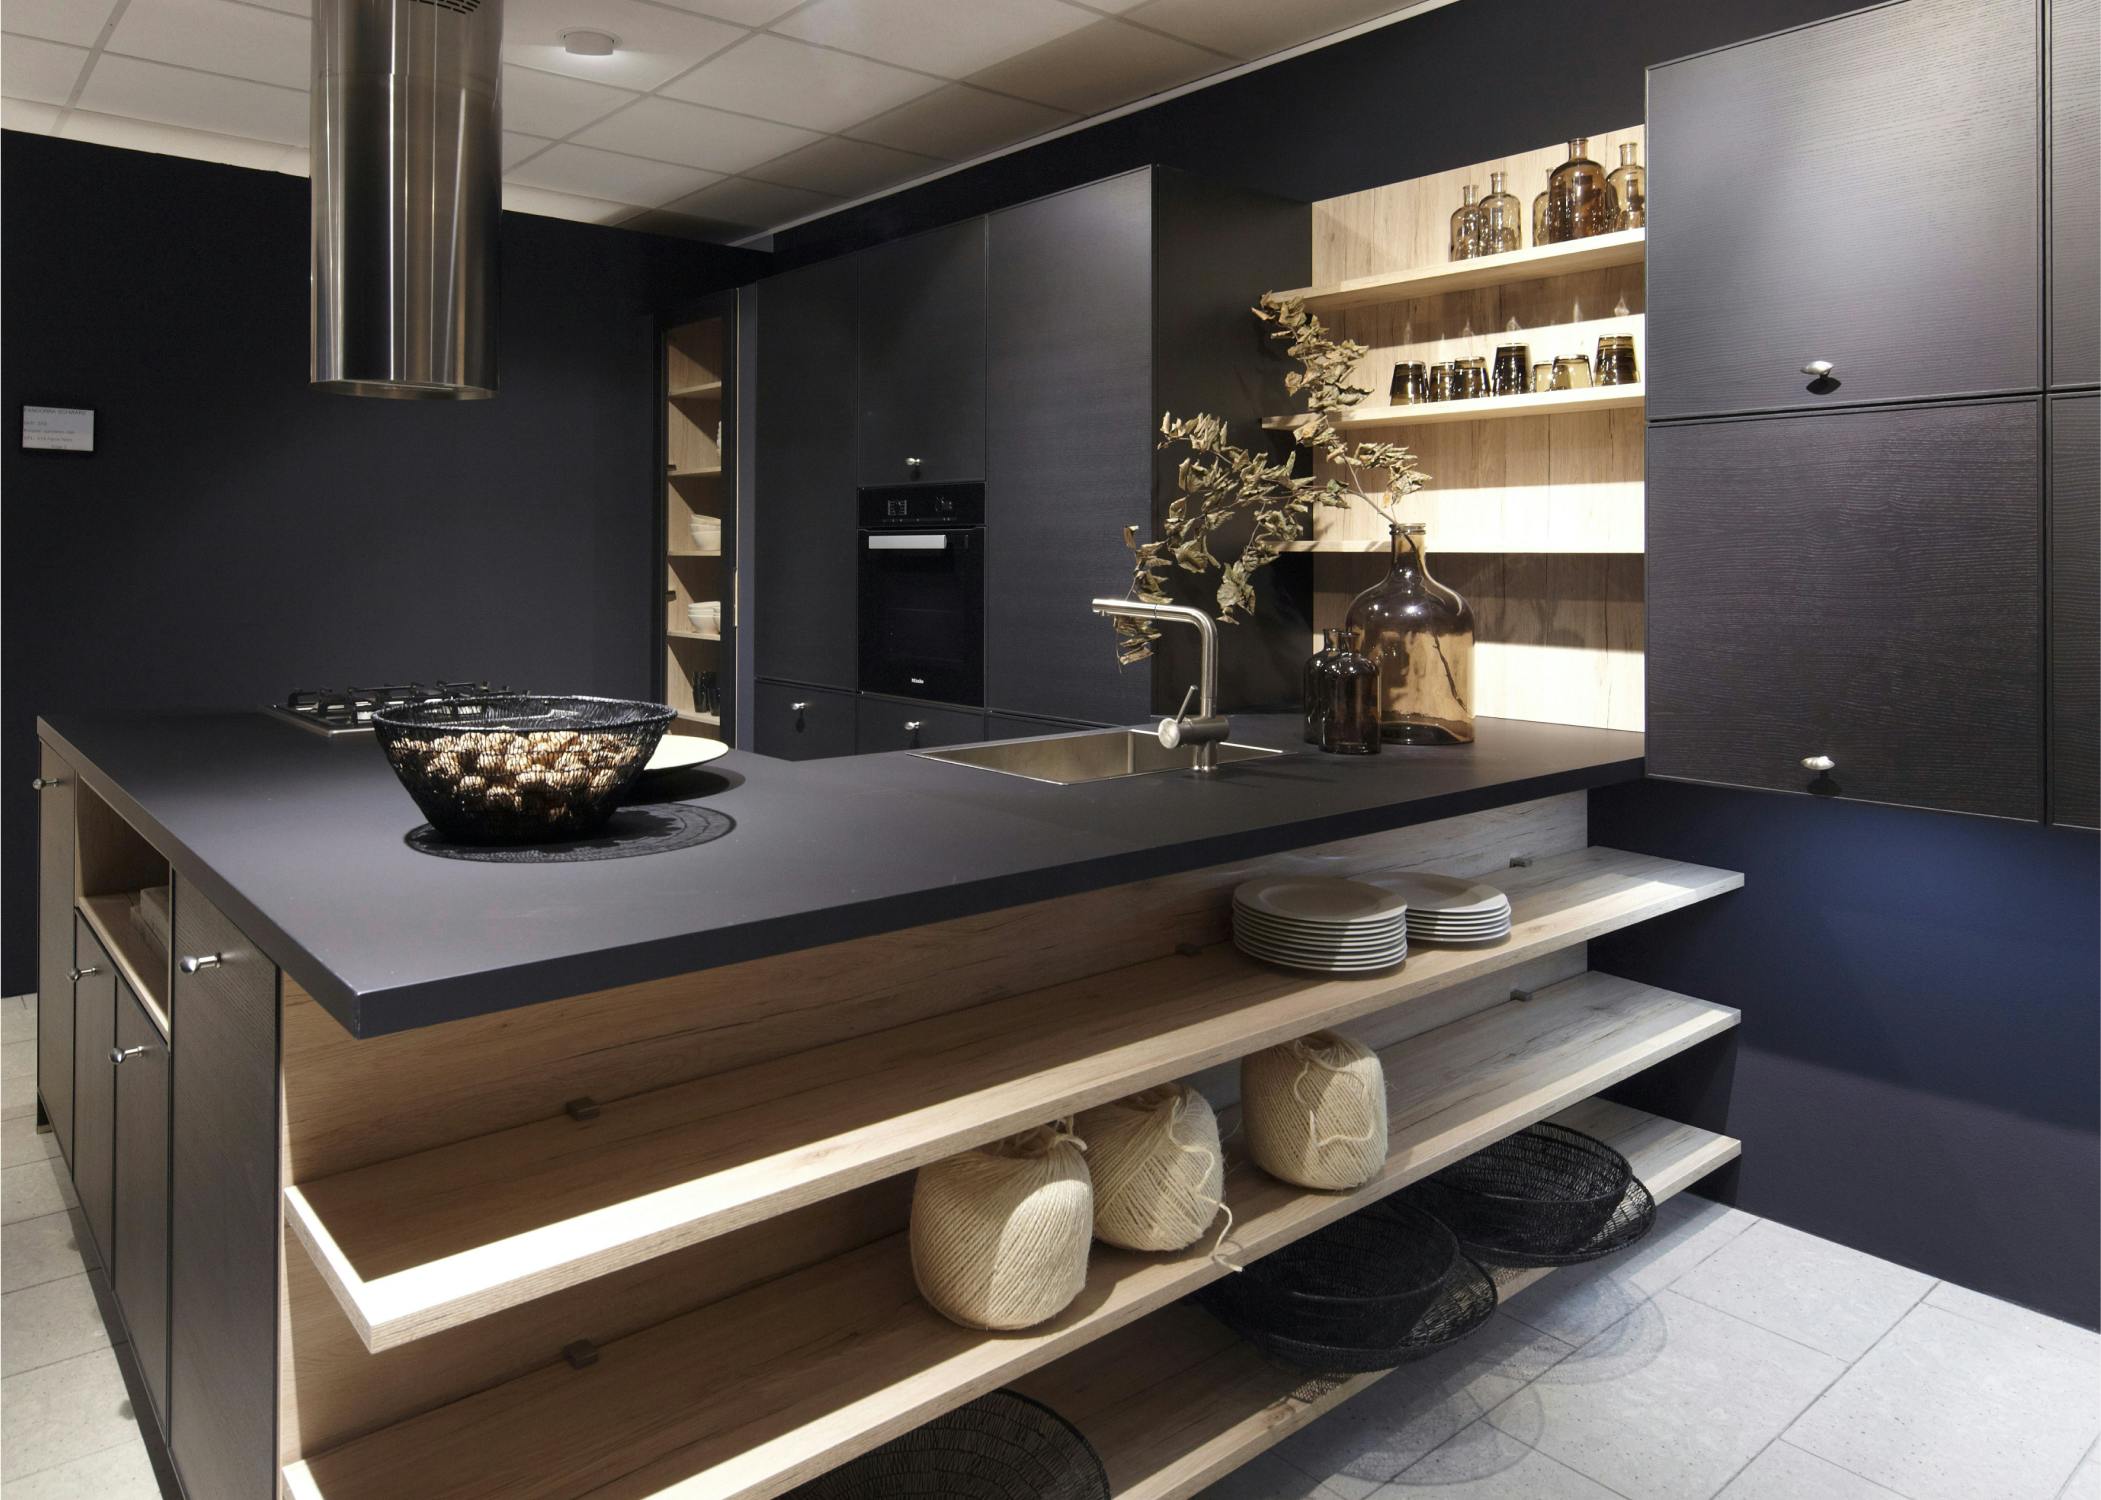 unique kitchen design with black materiel and marlbel, L island in the middle of the room with lights and elegant design